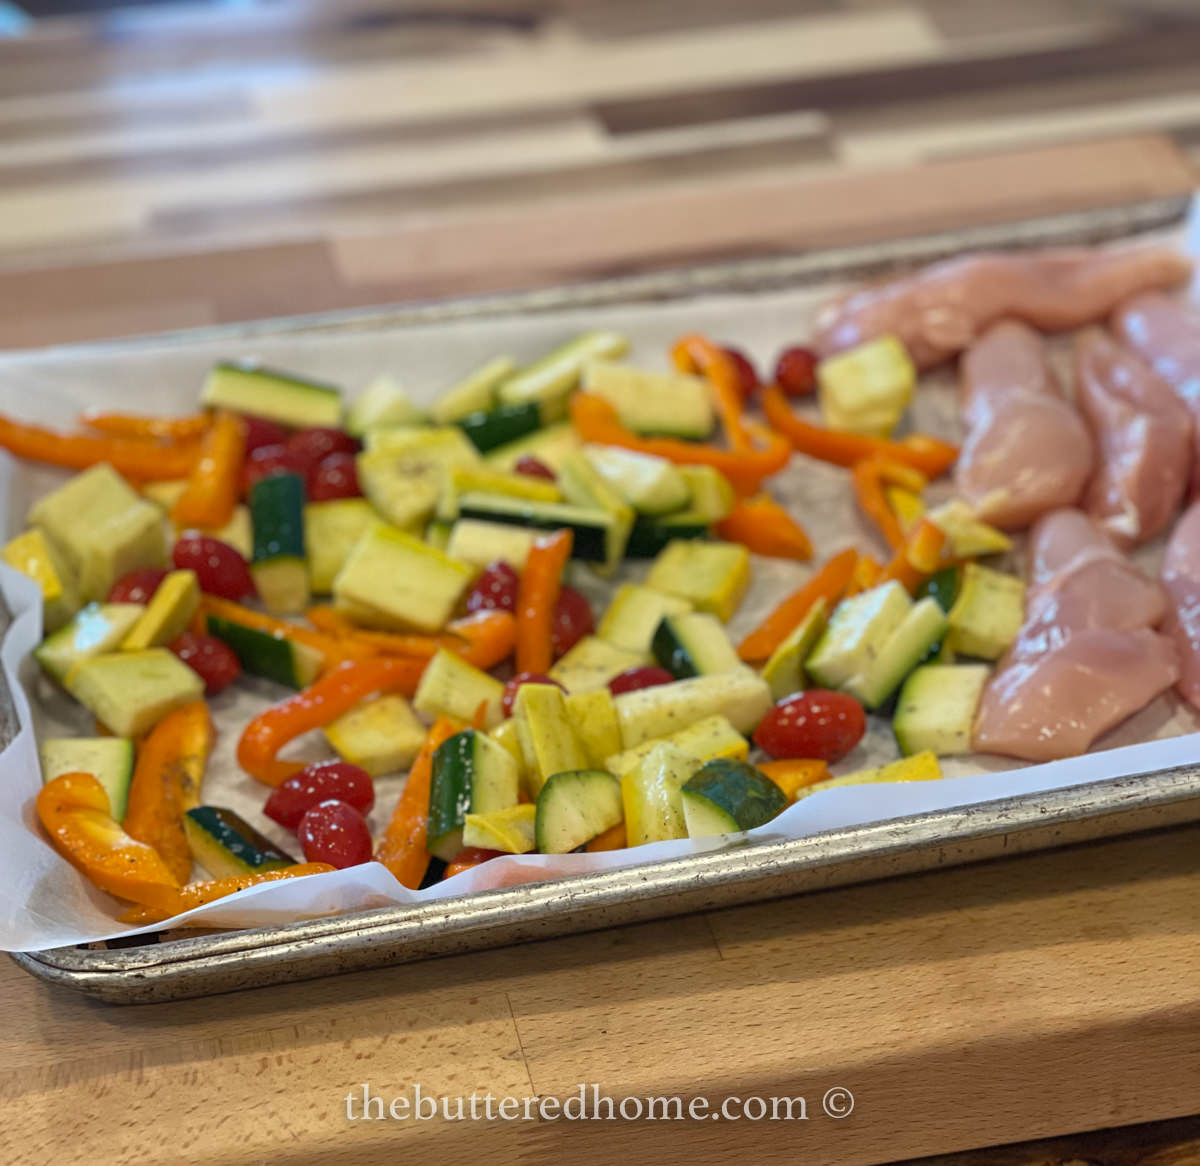 vegetables and uncooked chicken on sheet pan lined with parchment